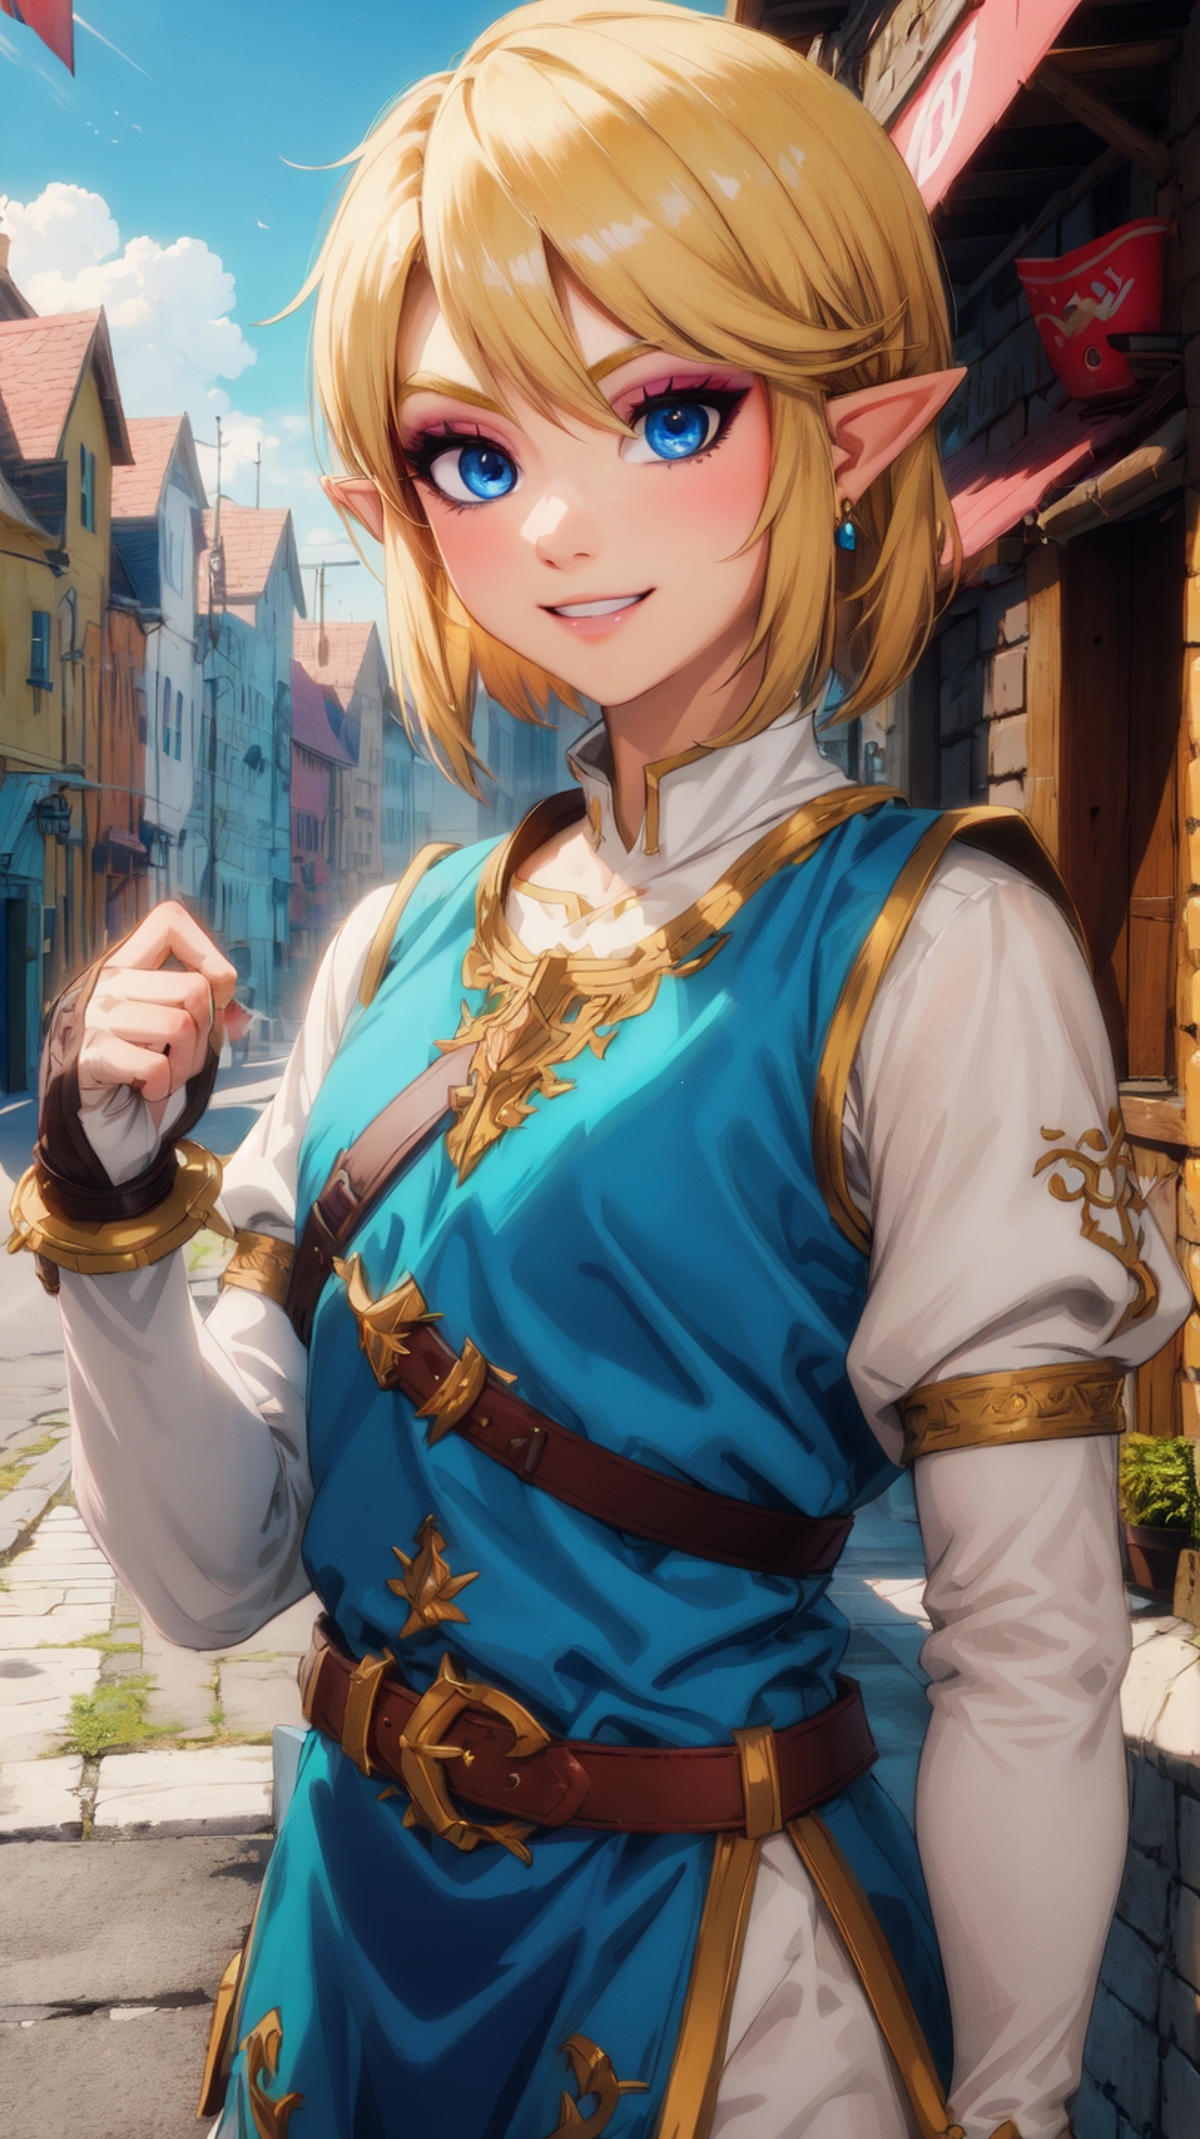 Link - Zelda (FemBy) (nsfw) image by marusame